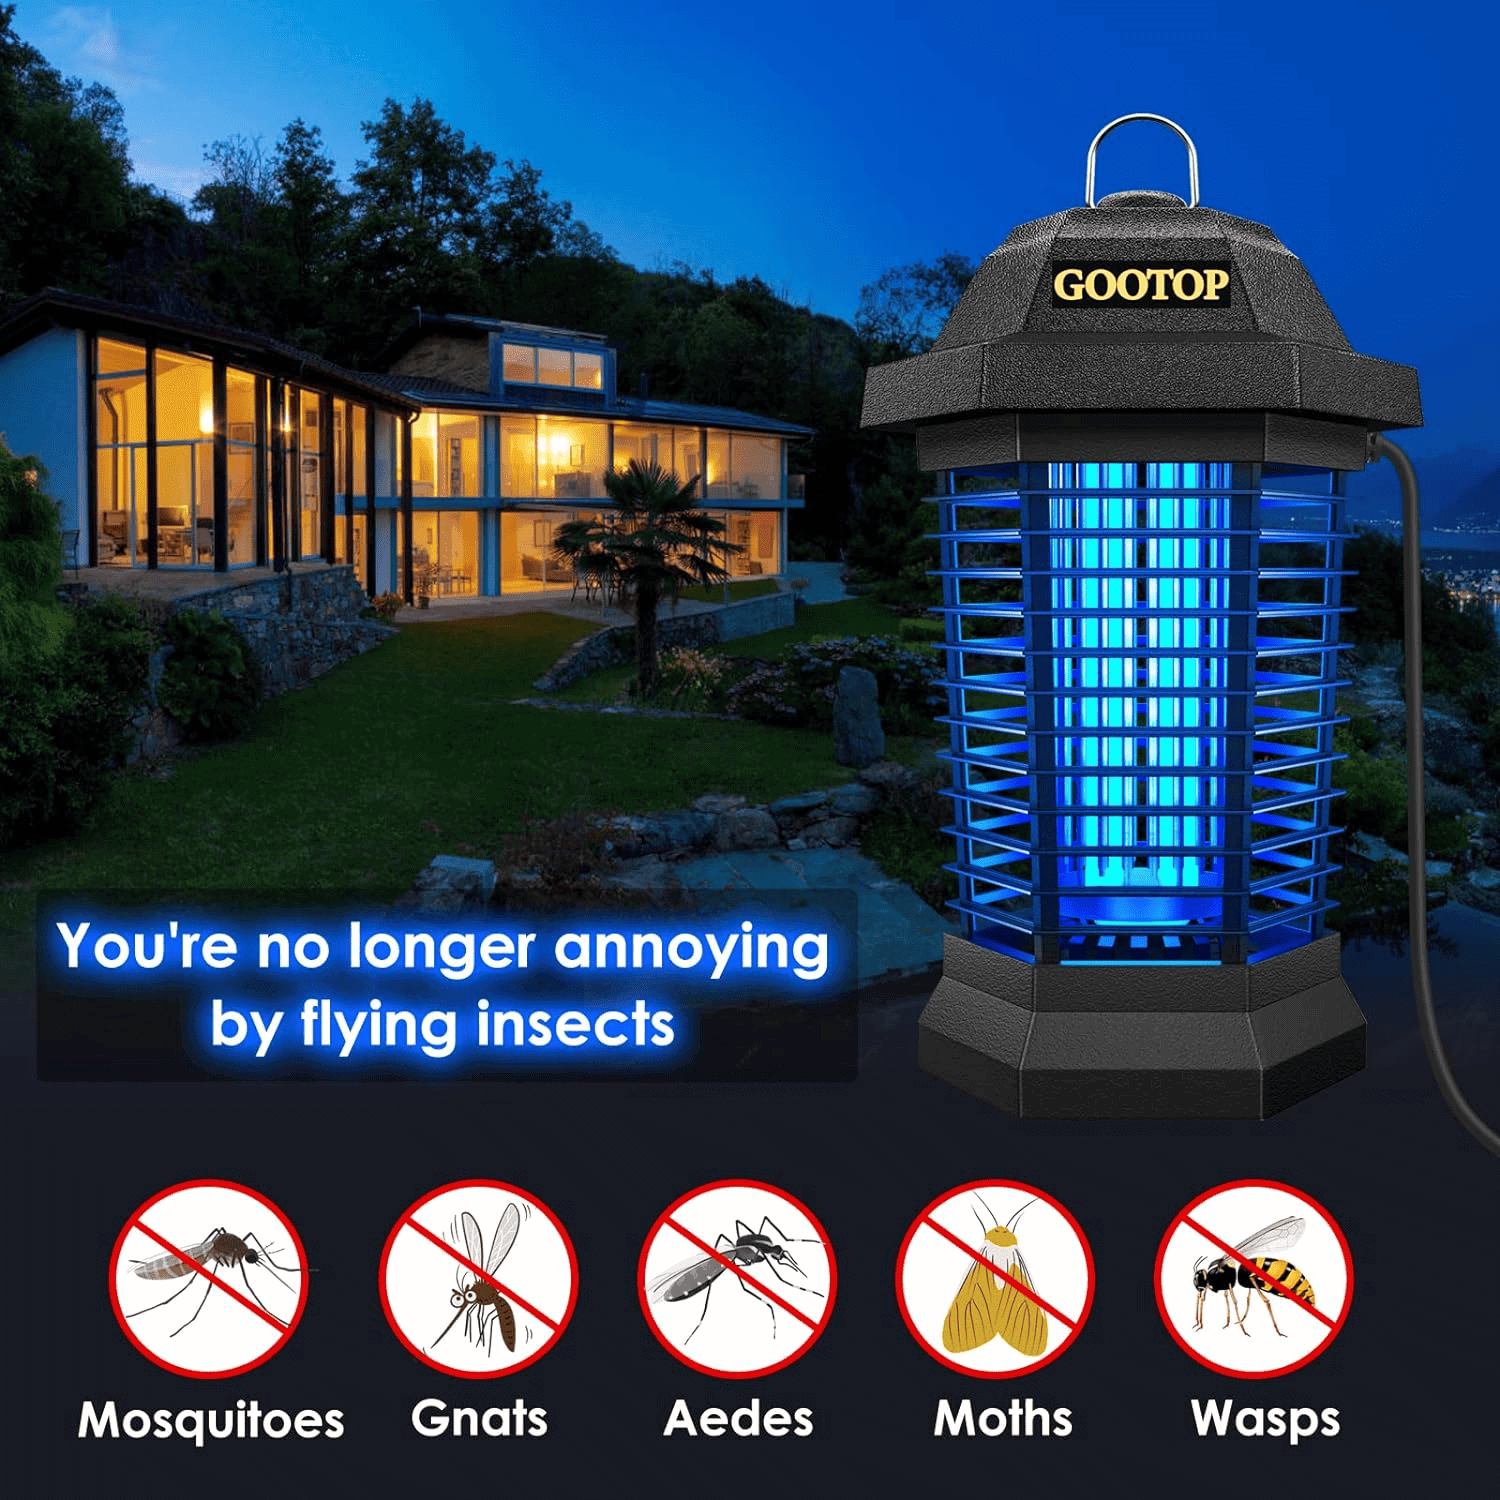 mosquito traps, can be placed near standing water or bird bath